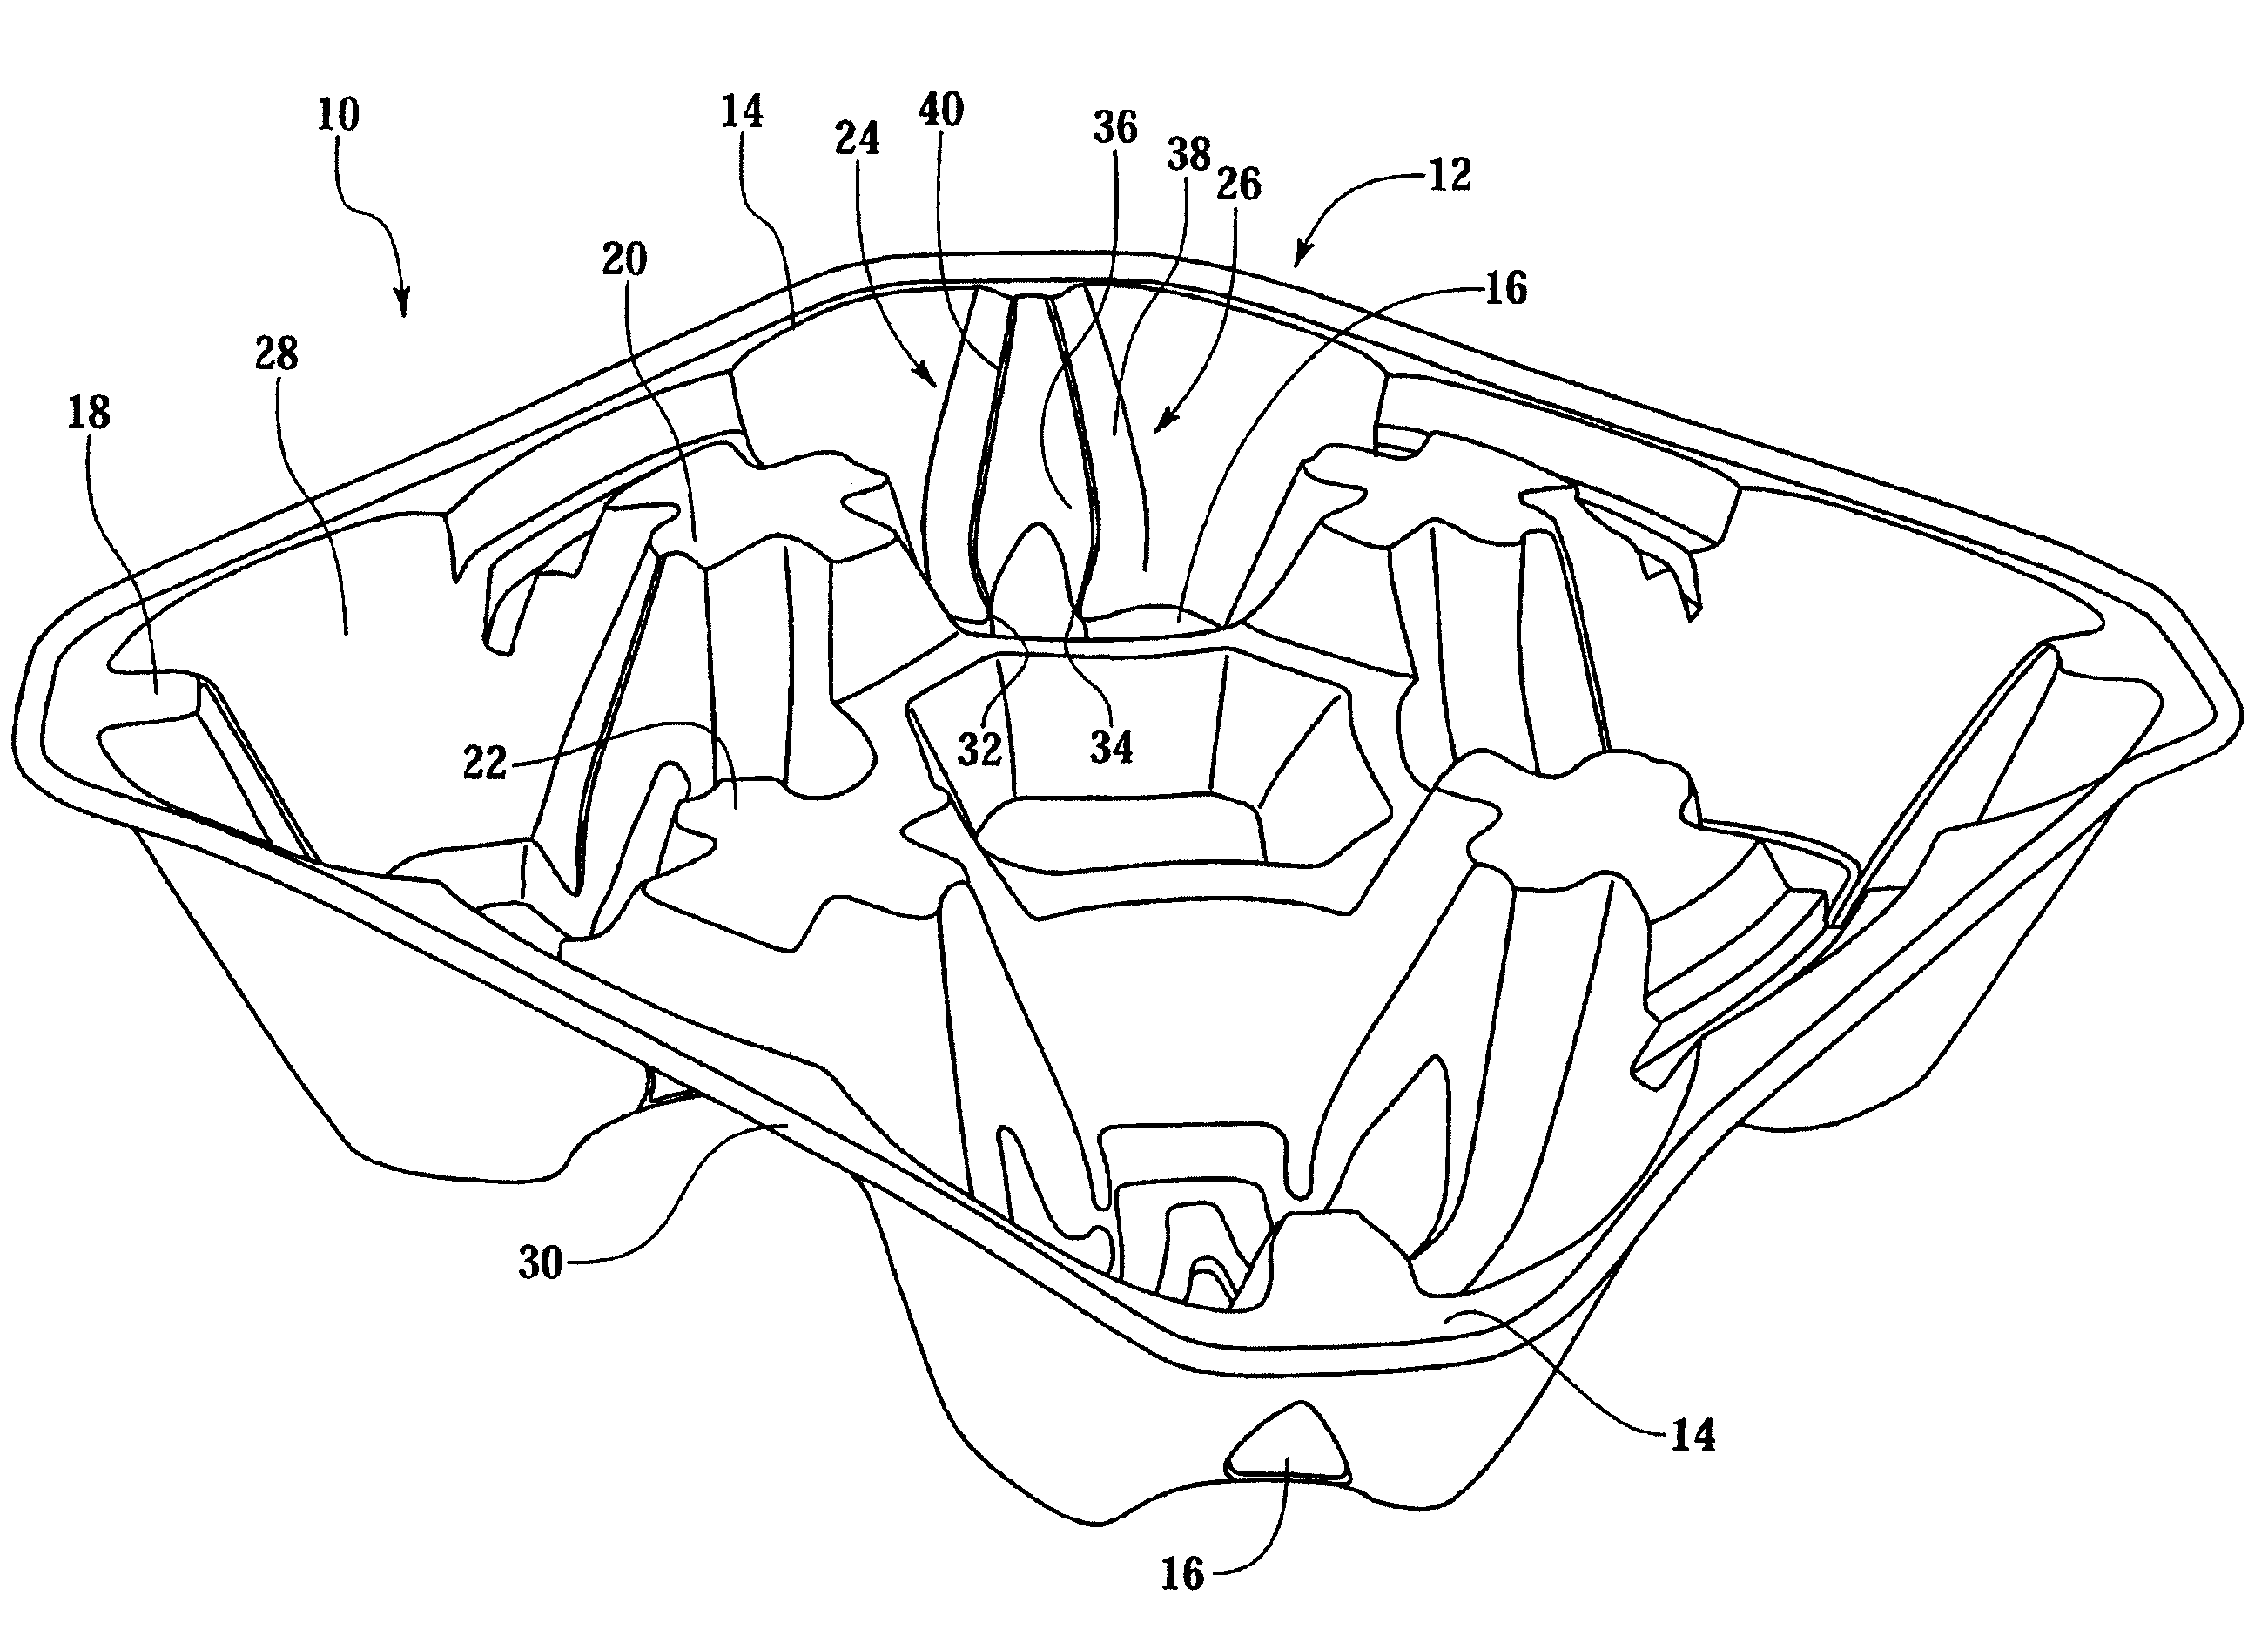 Cup holder having frusto-conical cavities